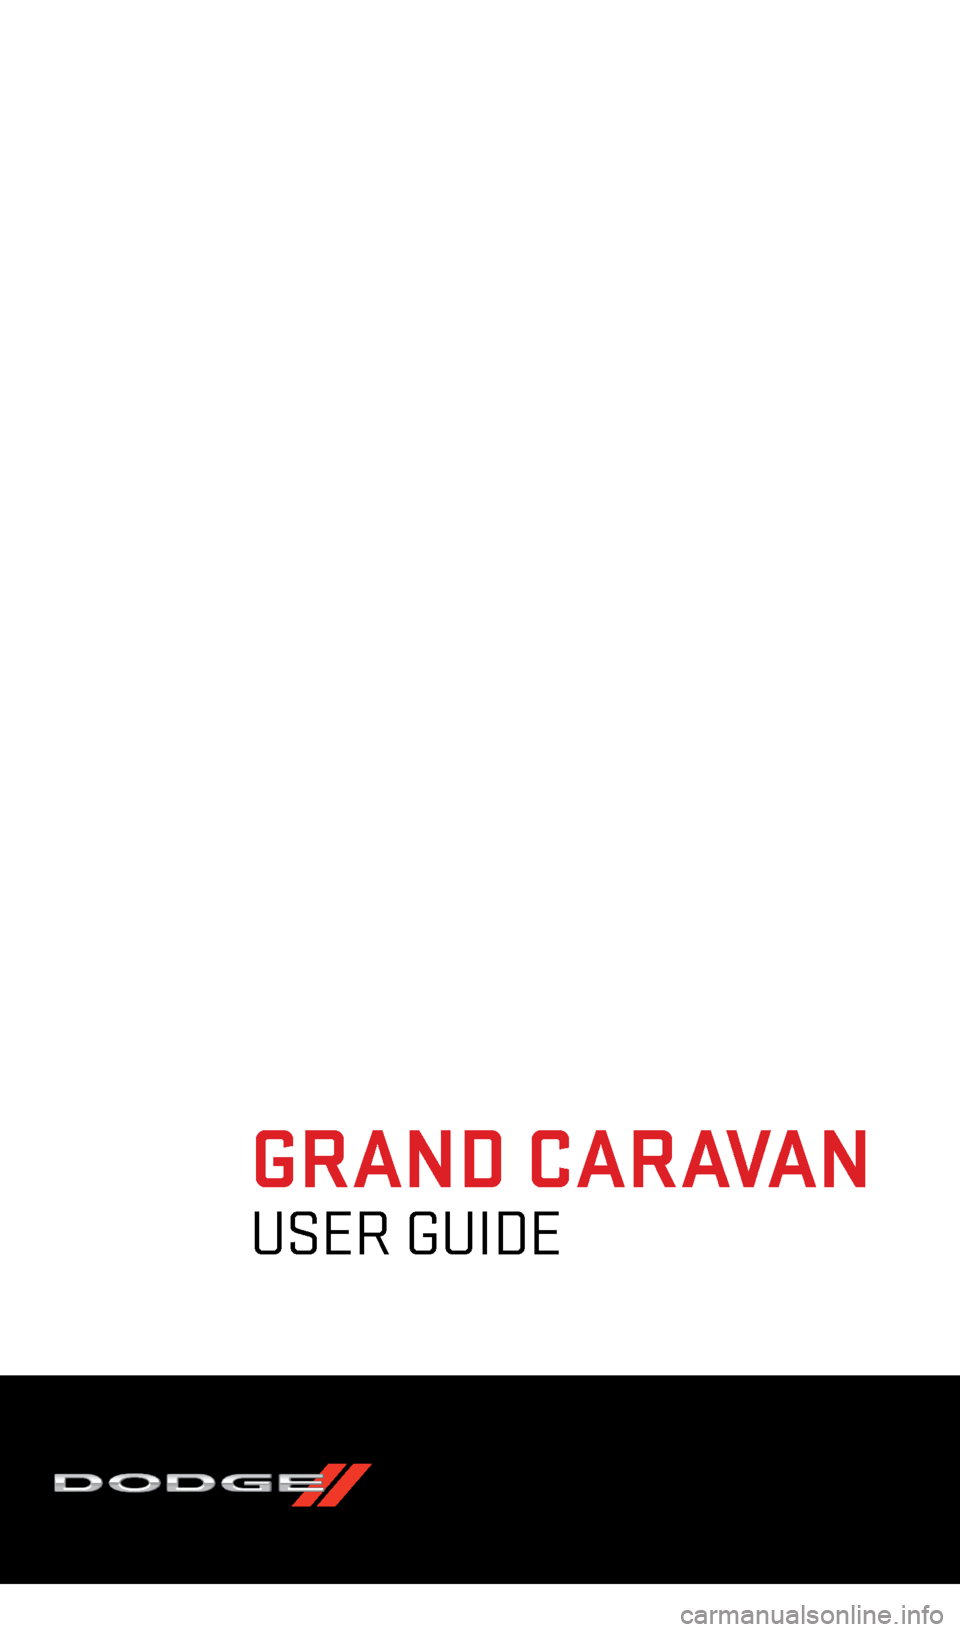 DODGE GRAND CARAVAN 2013 5.G User Guide 13Y532-926-AA
grand caravanFourth Editio\f
User \buide
grand Caravan
UsE
r \bU idE
2013
download a free v ehiCle information a pp  
by visiti\fg your applicatio\f store, Keyword (d rive dodge), or sca